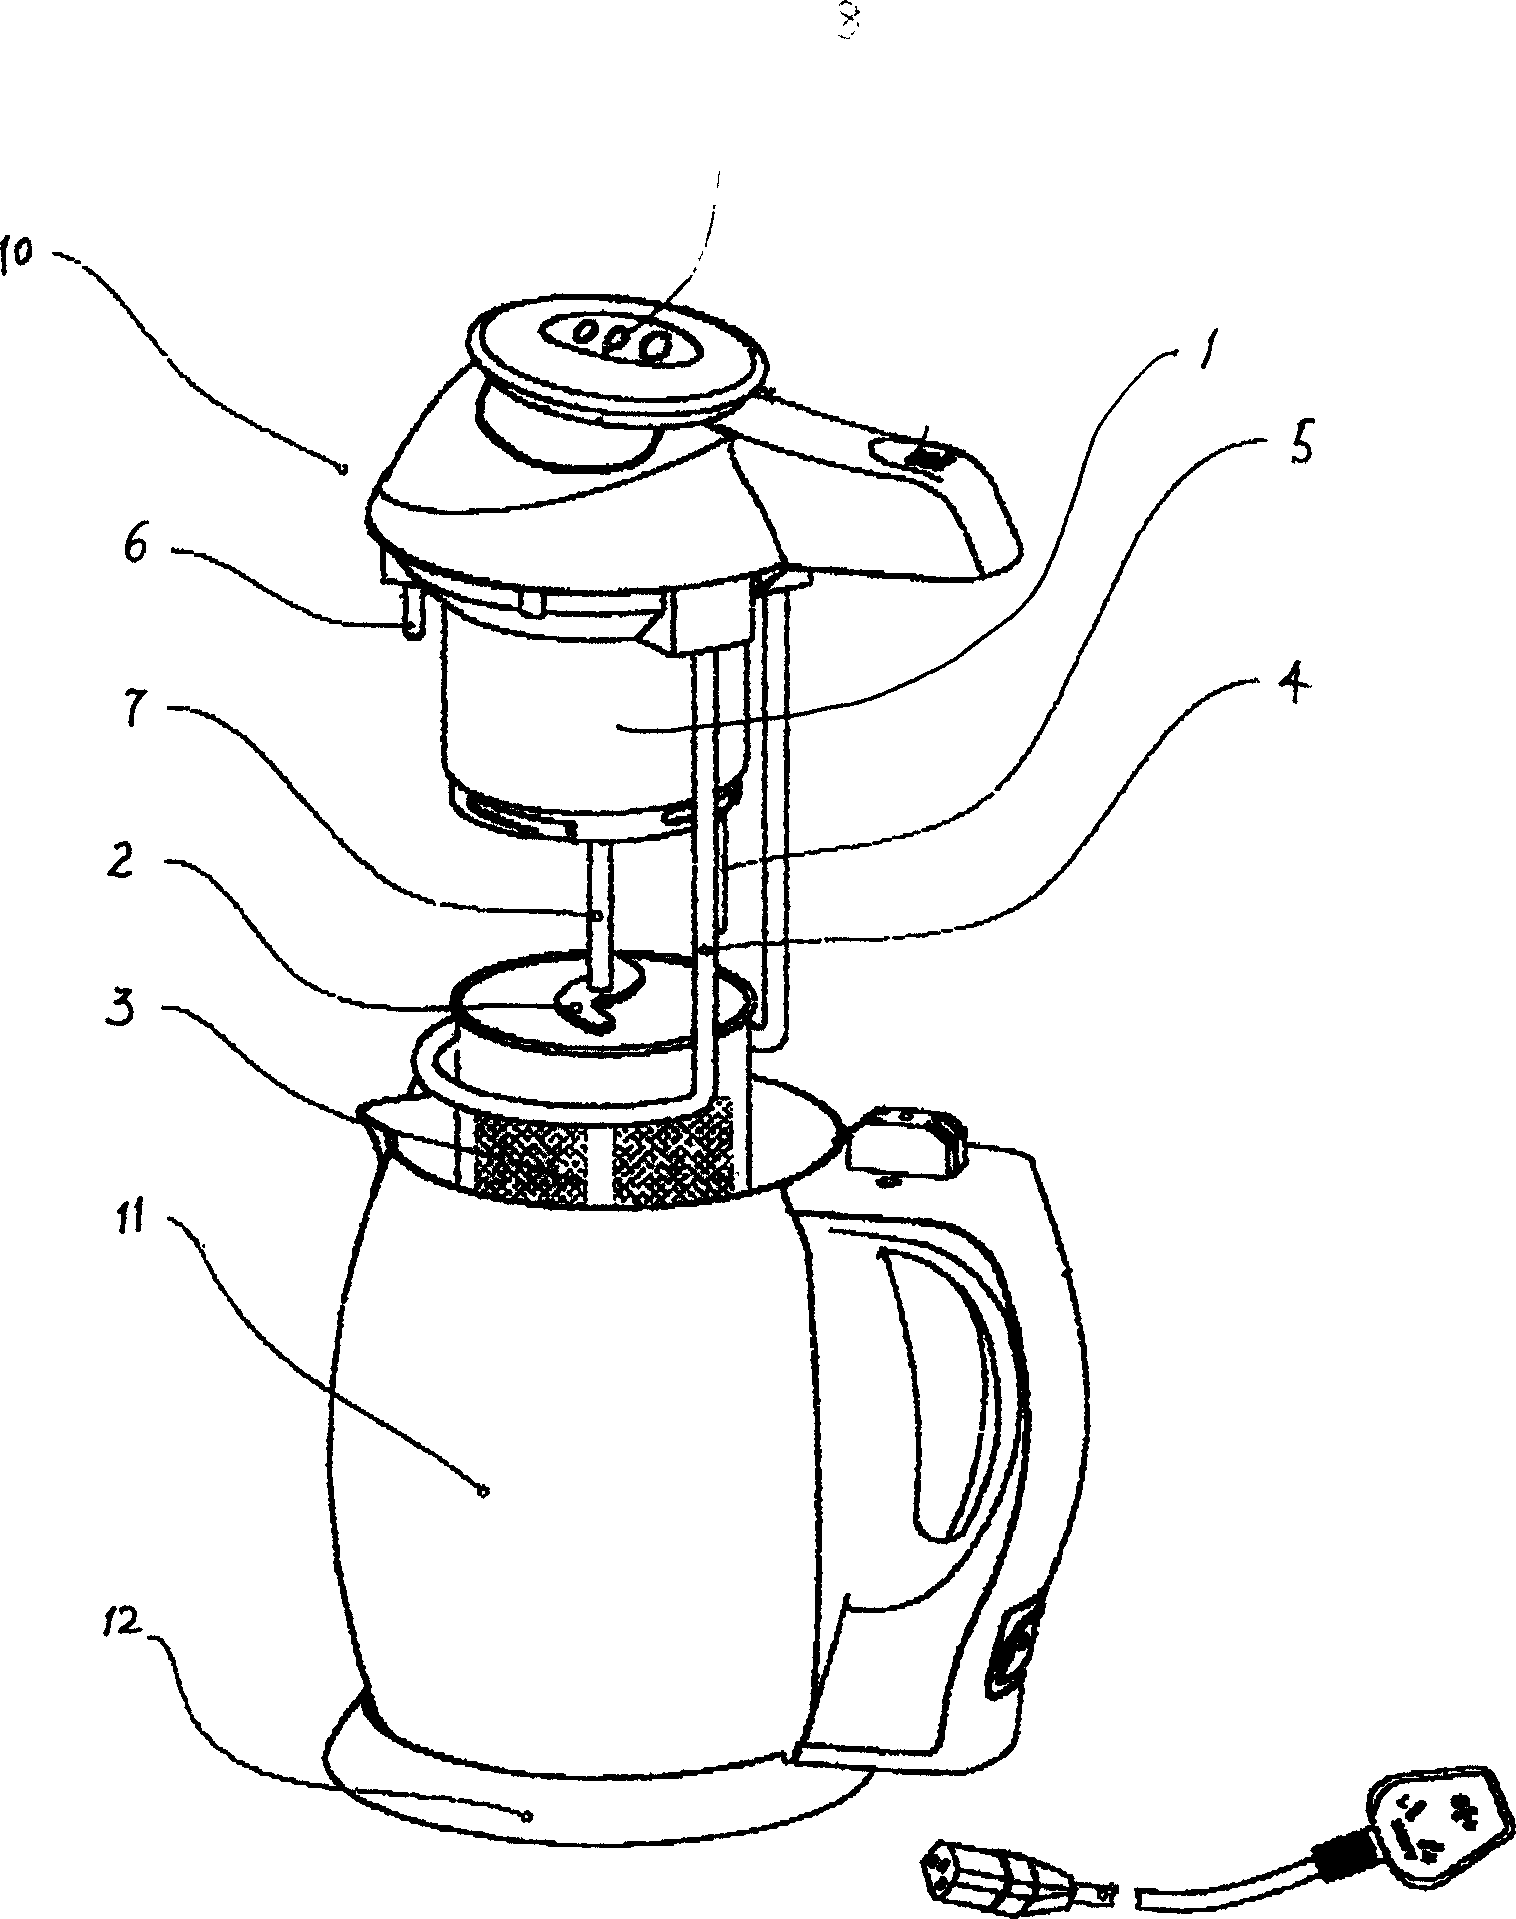 Multifunctional domestic food processing method and apparatus